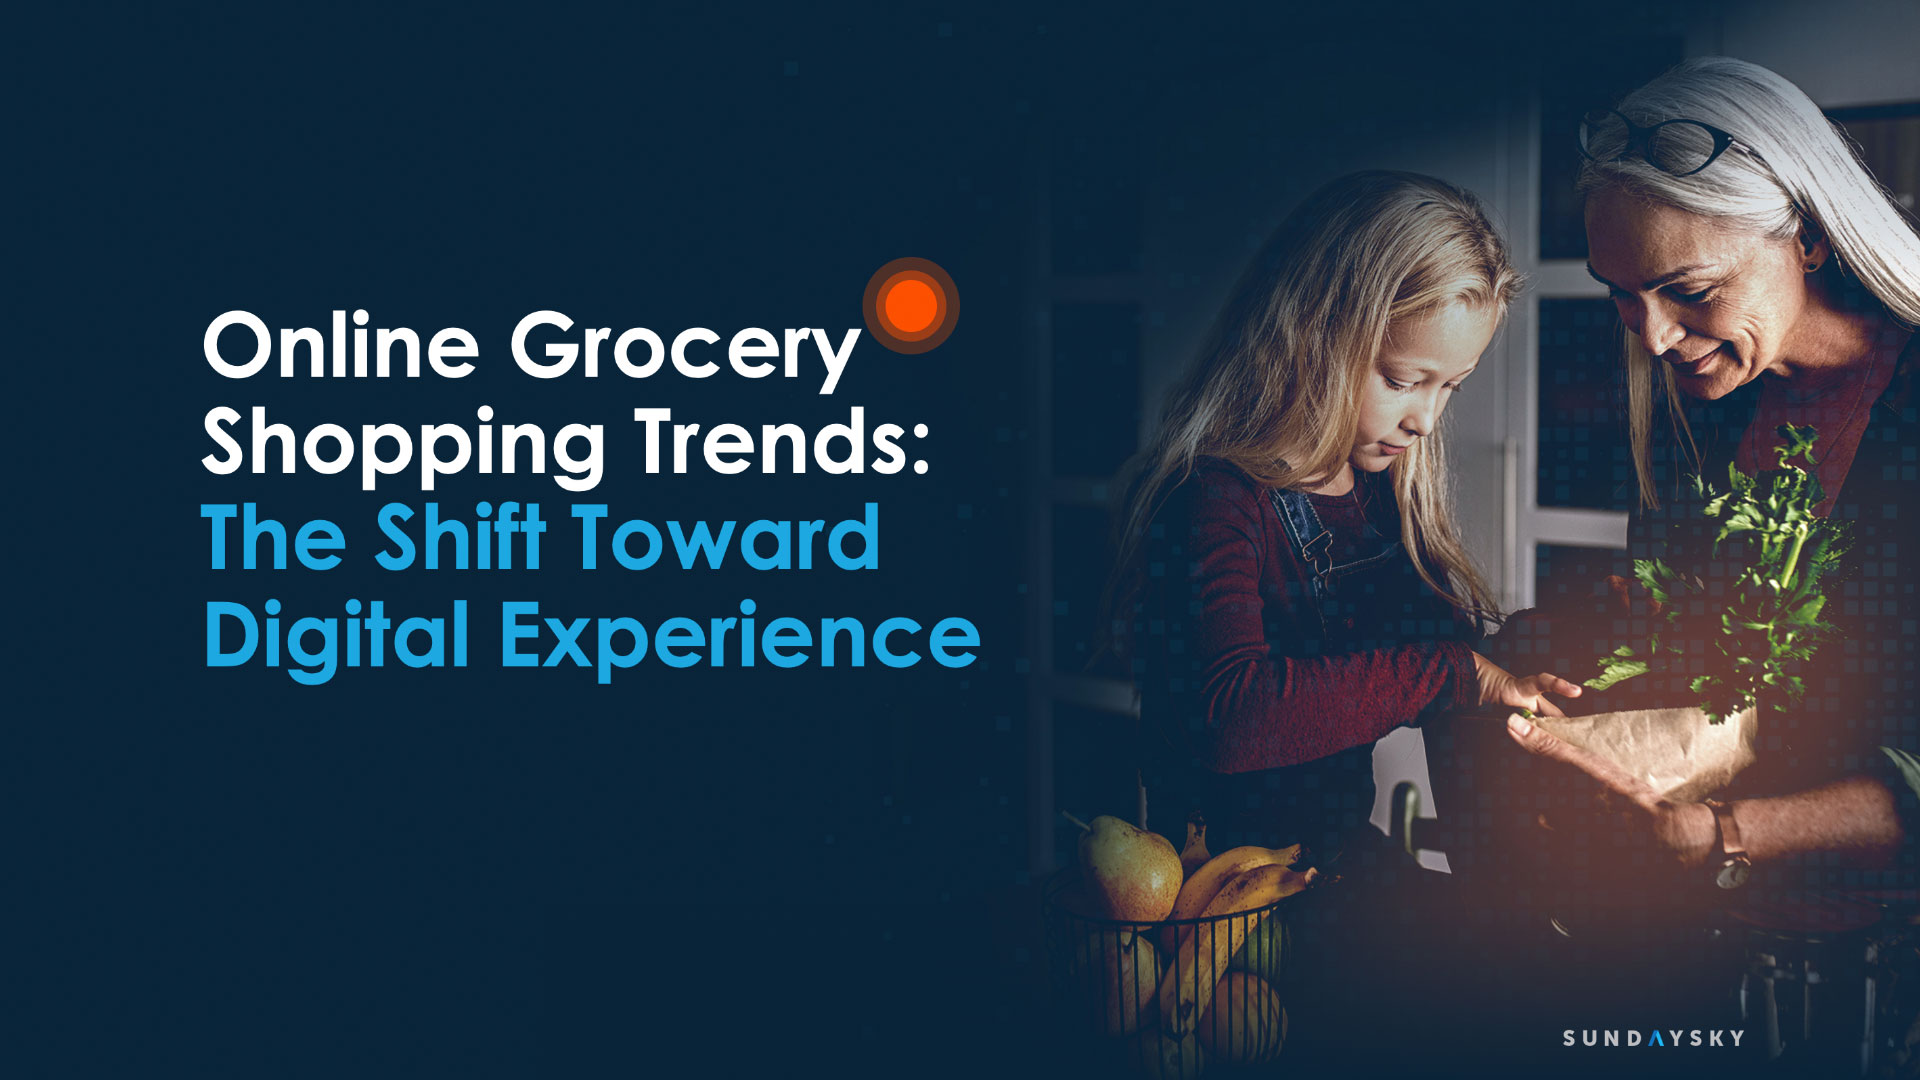 Online Grocery Shopping Trends: The Shift Toward Digital Experience